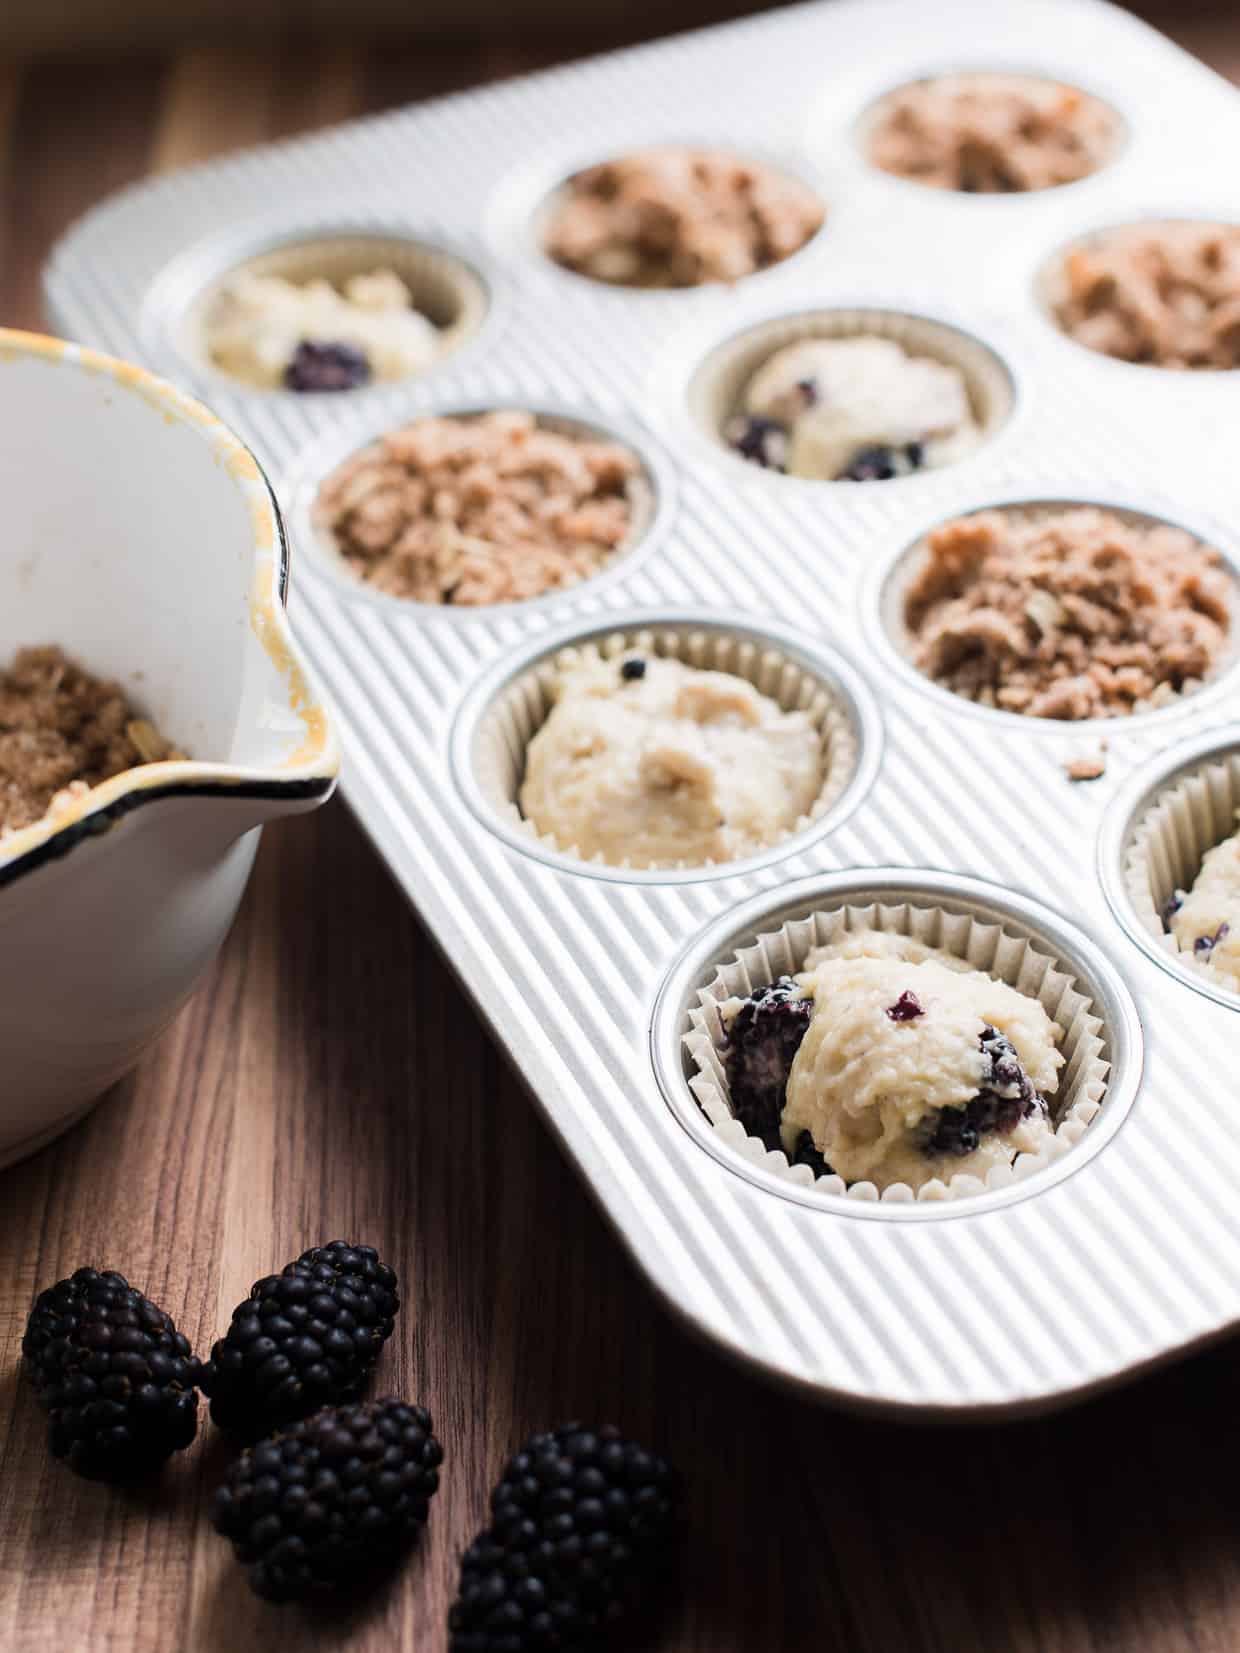 Muffin tin filled with Blackberry Yogurt Muffins ready to be baked.